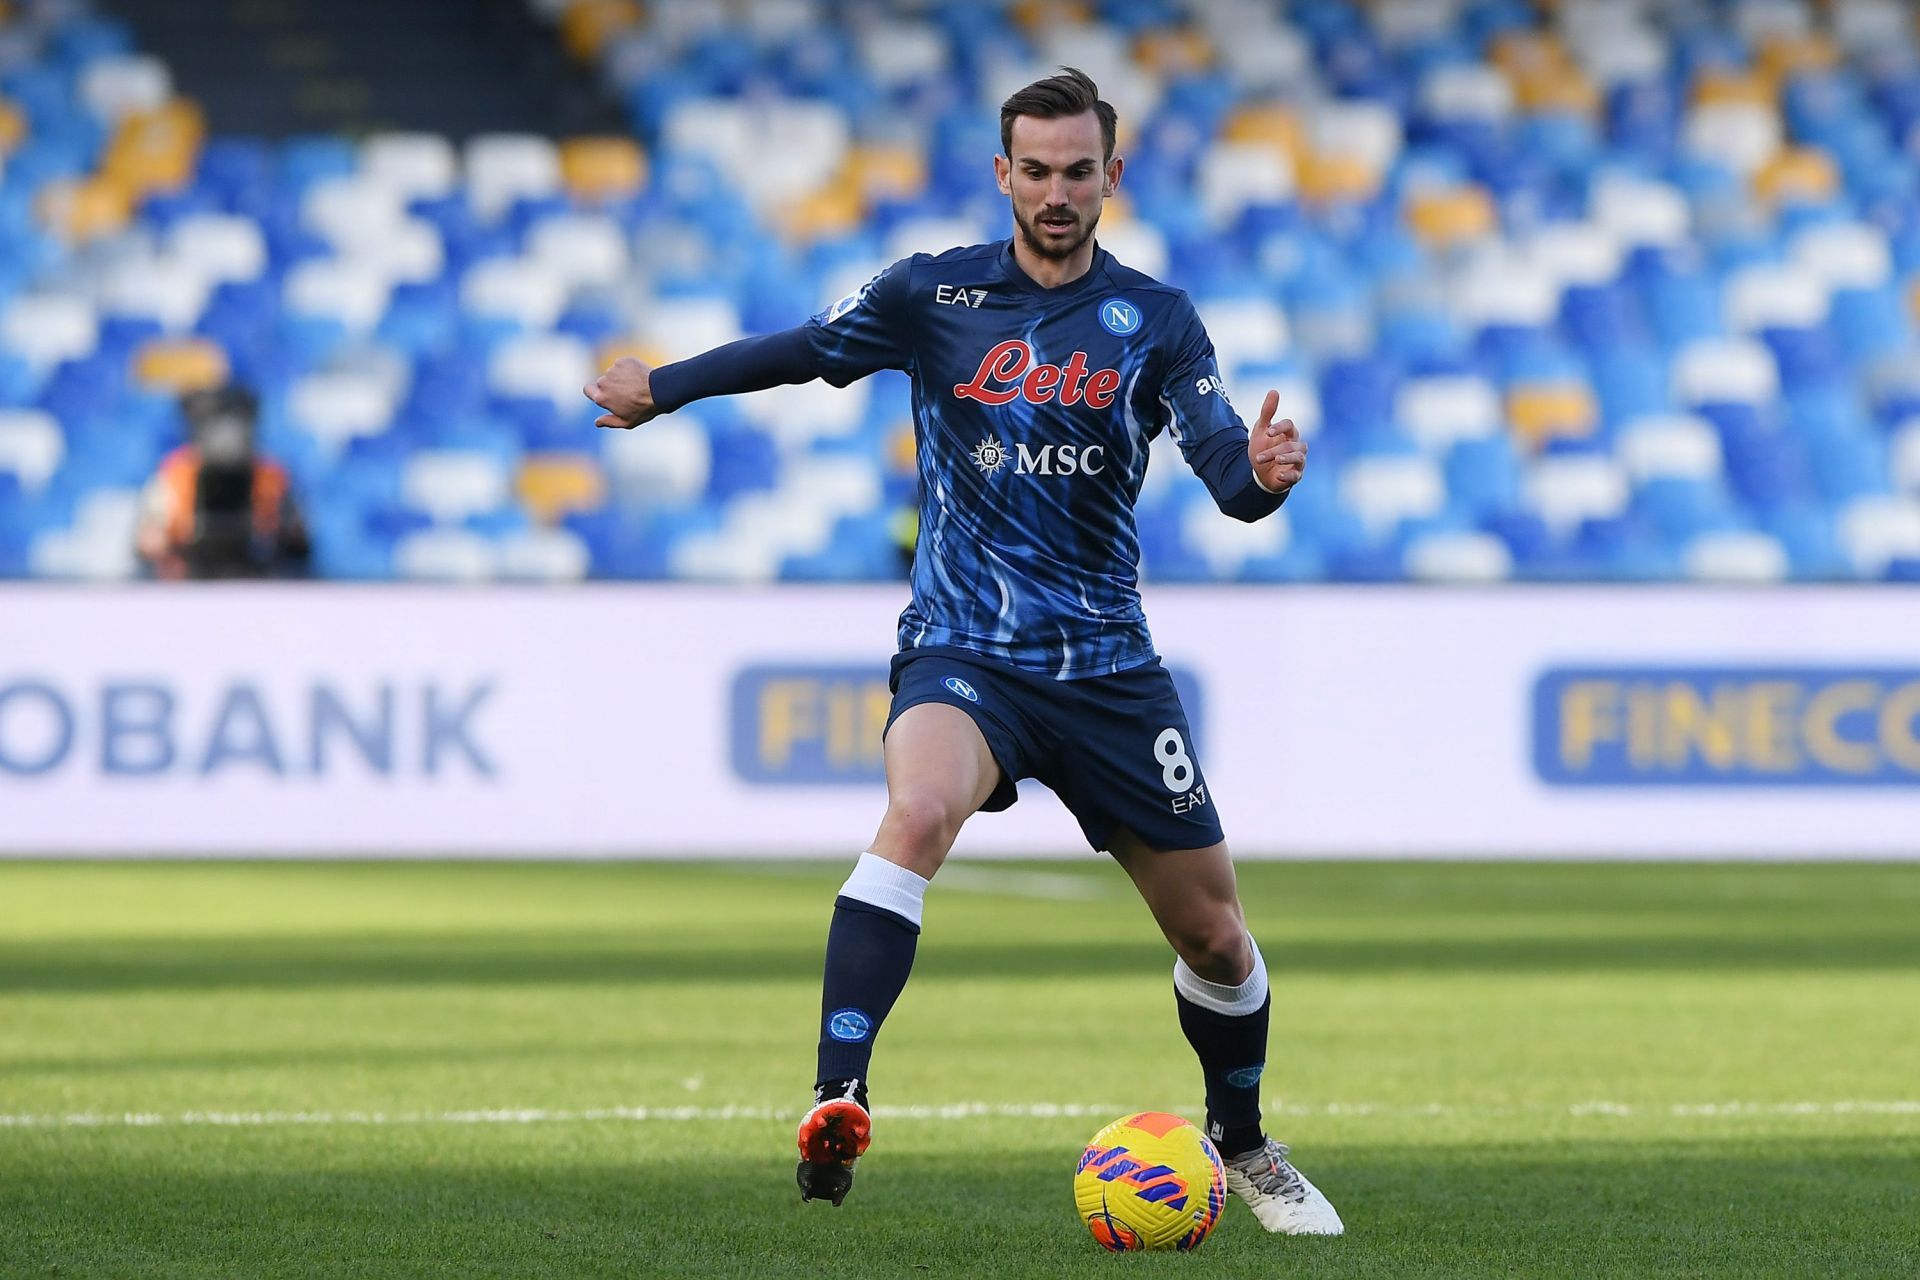 Fabian Ruiz has attracted the attention of various European giants with his performances